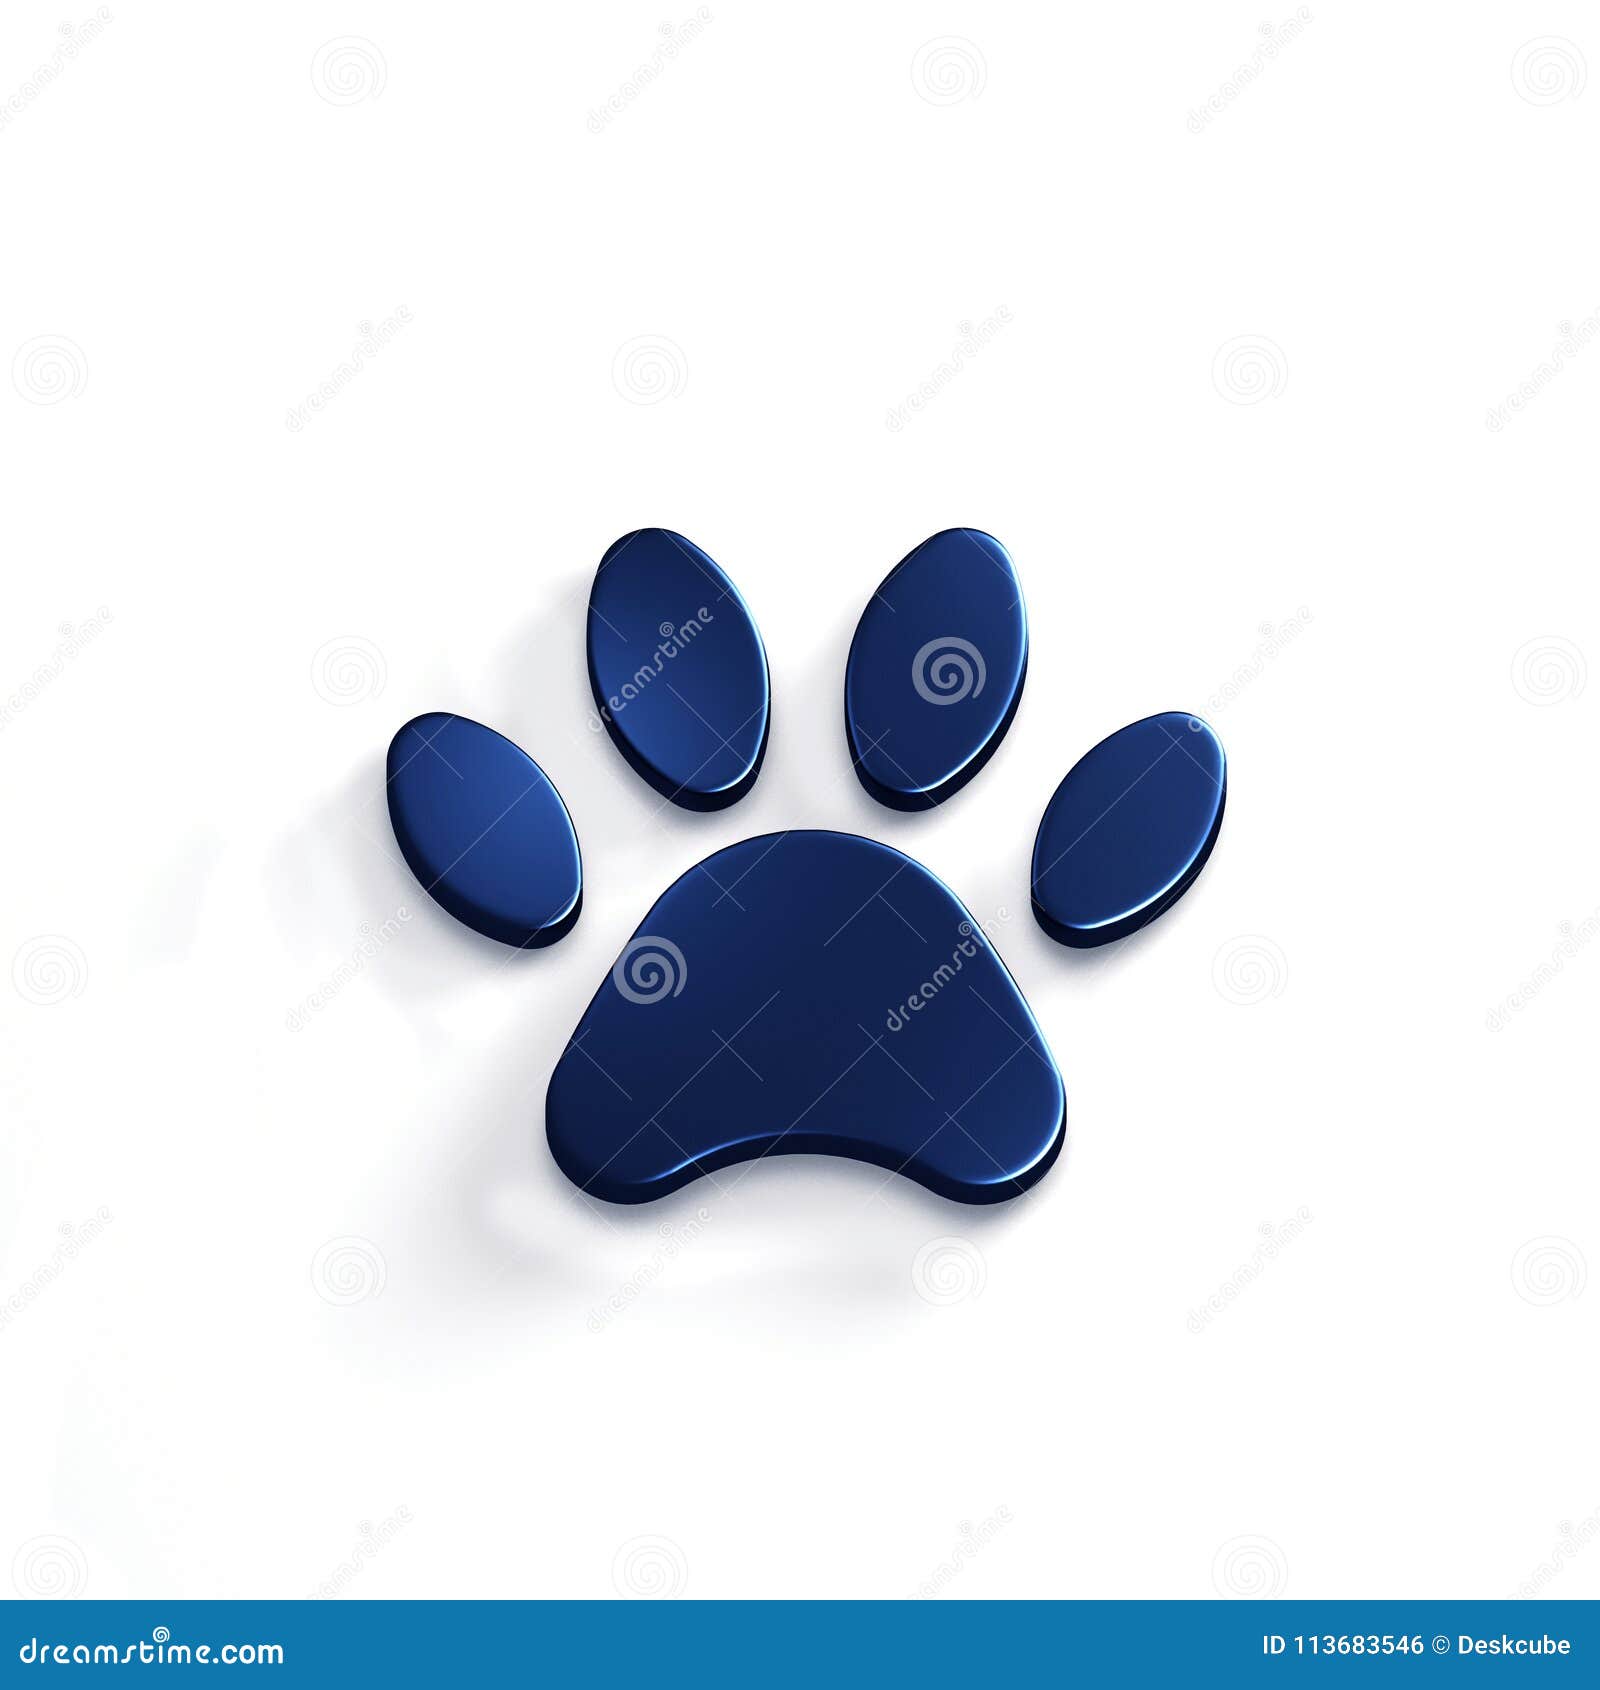 Space Paws Download